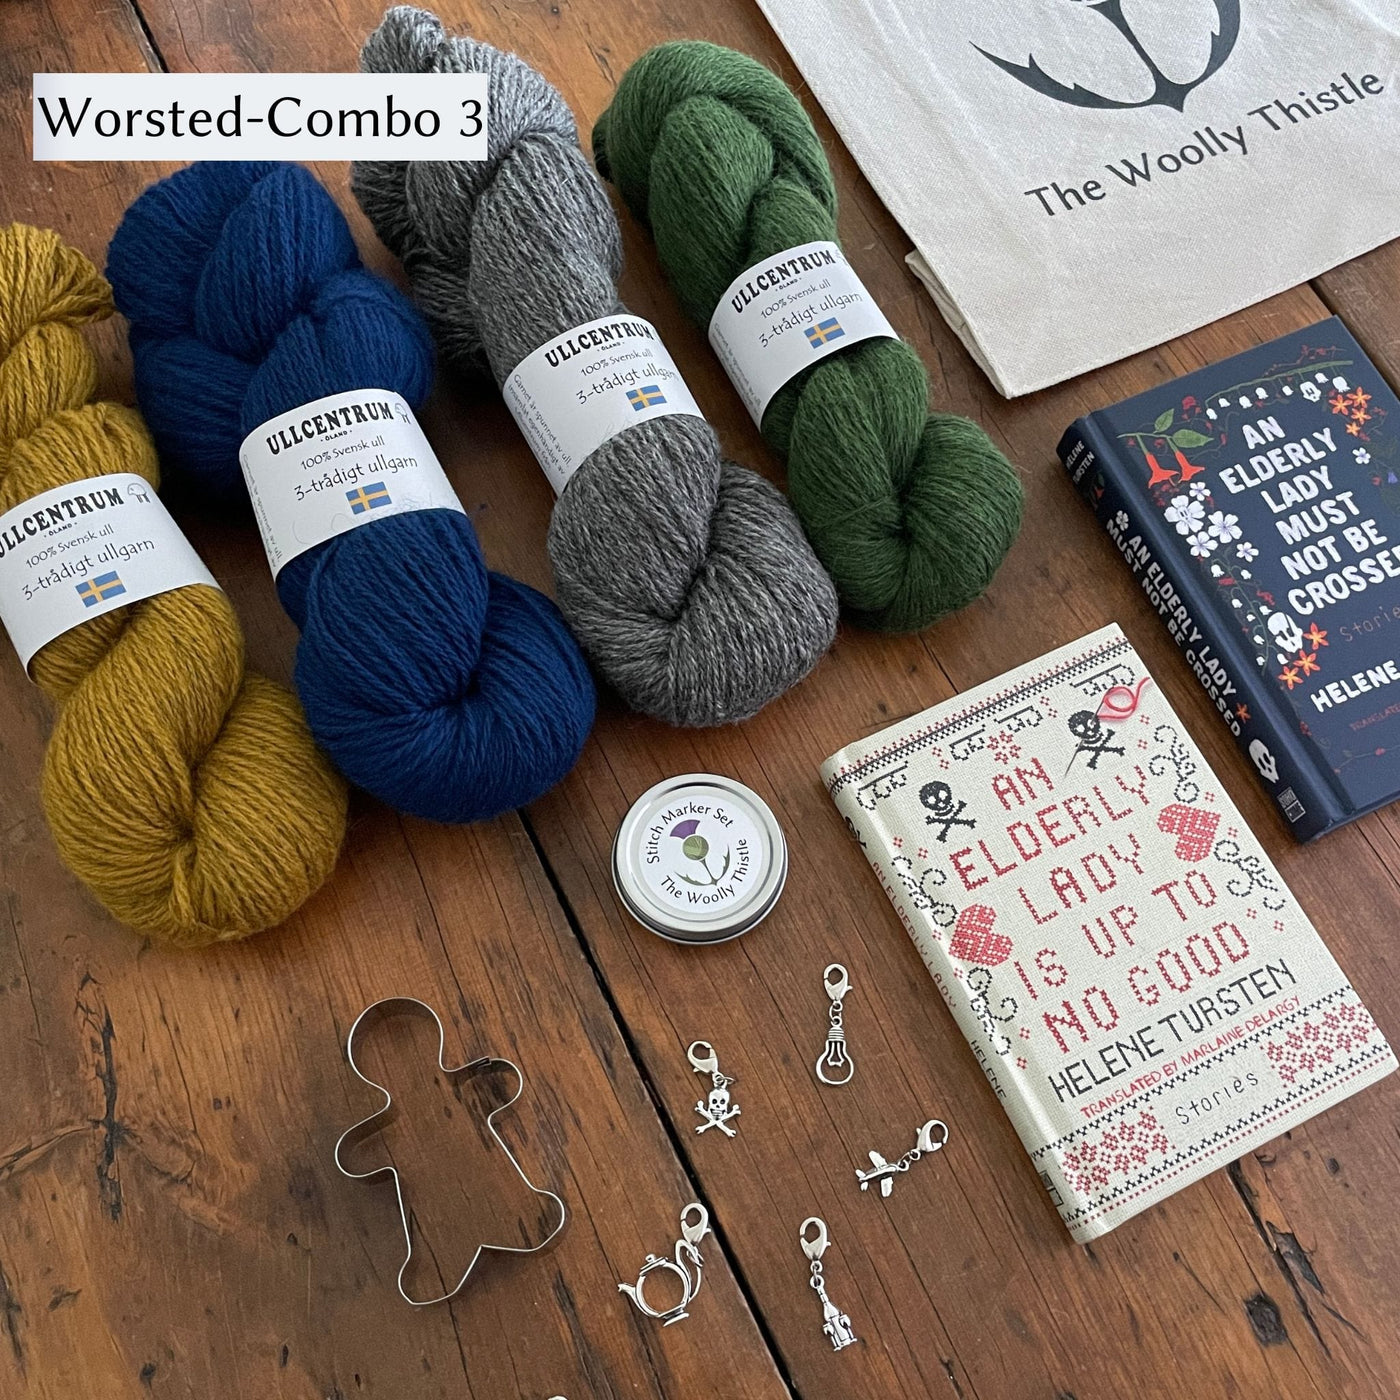 The Swedish Book Bundle components which include two books by Helene Tursten, TWT Tote bag, Stitch marker set, gingerbread cookie cutter, and Ullcentrum Worsted Weight yarn. Components are shown and laid out on table. Worsted Combo 3 includes Yarn in gold, blue, grey, and green. 